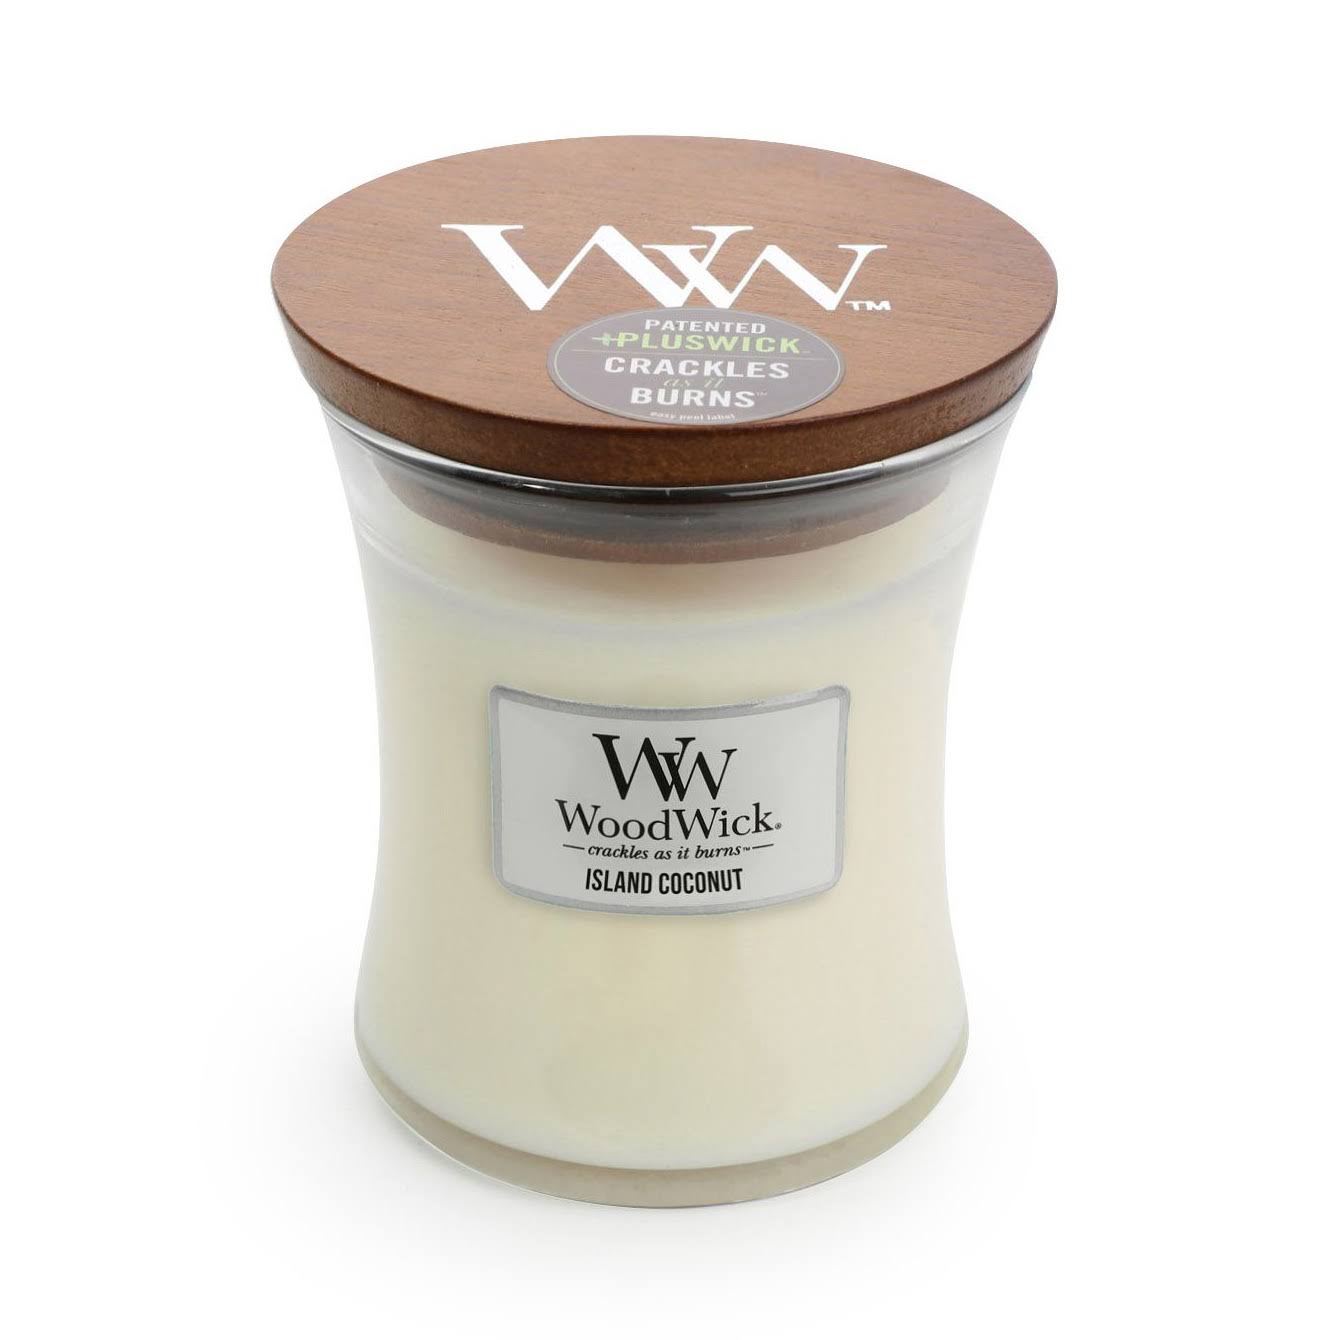 WoodWick Scented High Quality Soy Wax Candle - Island Coconut, Medium